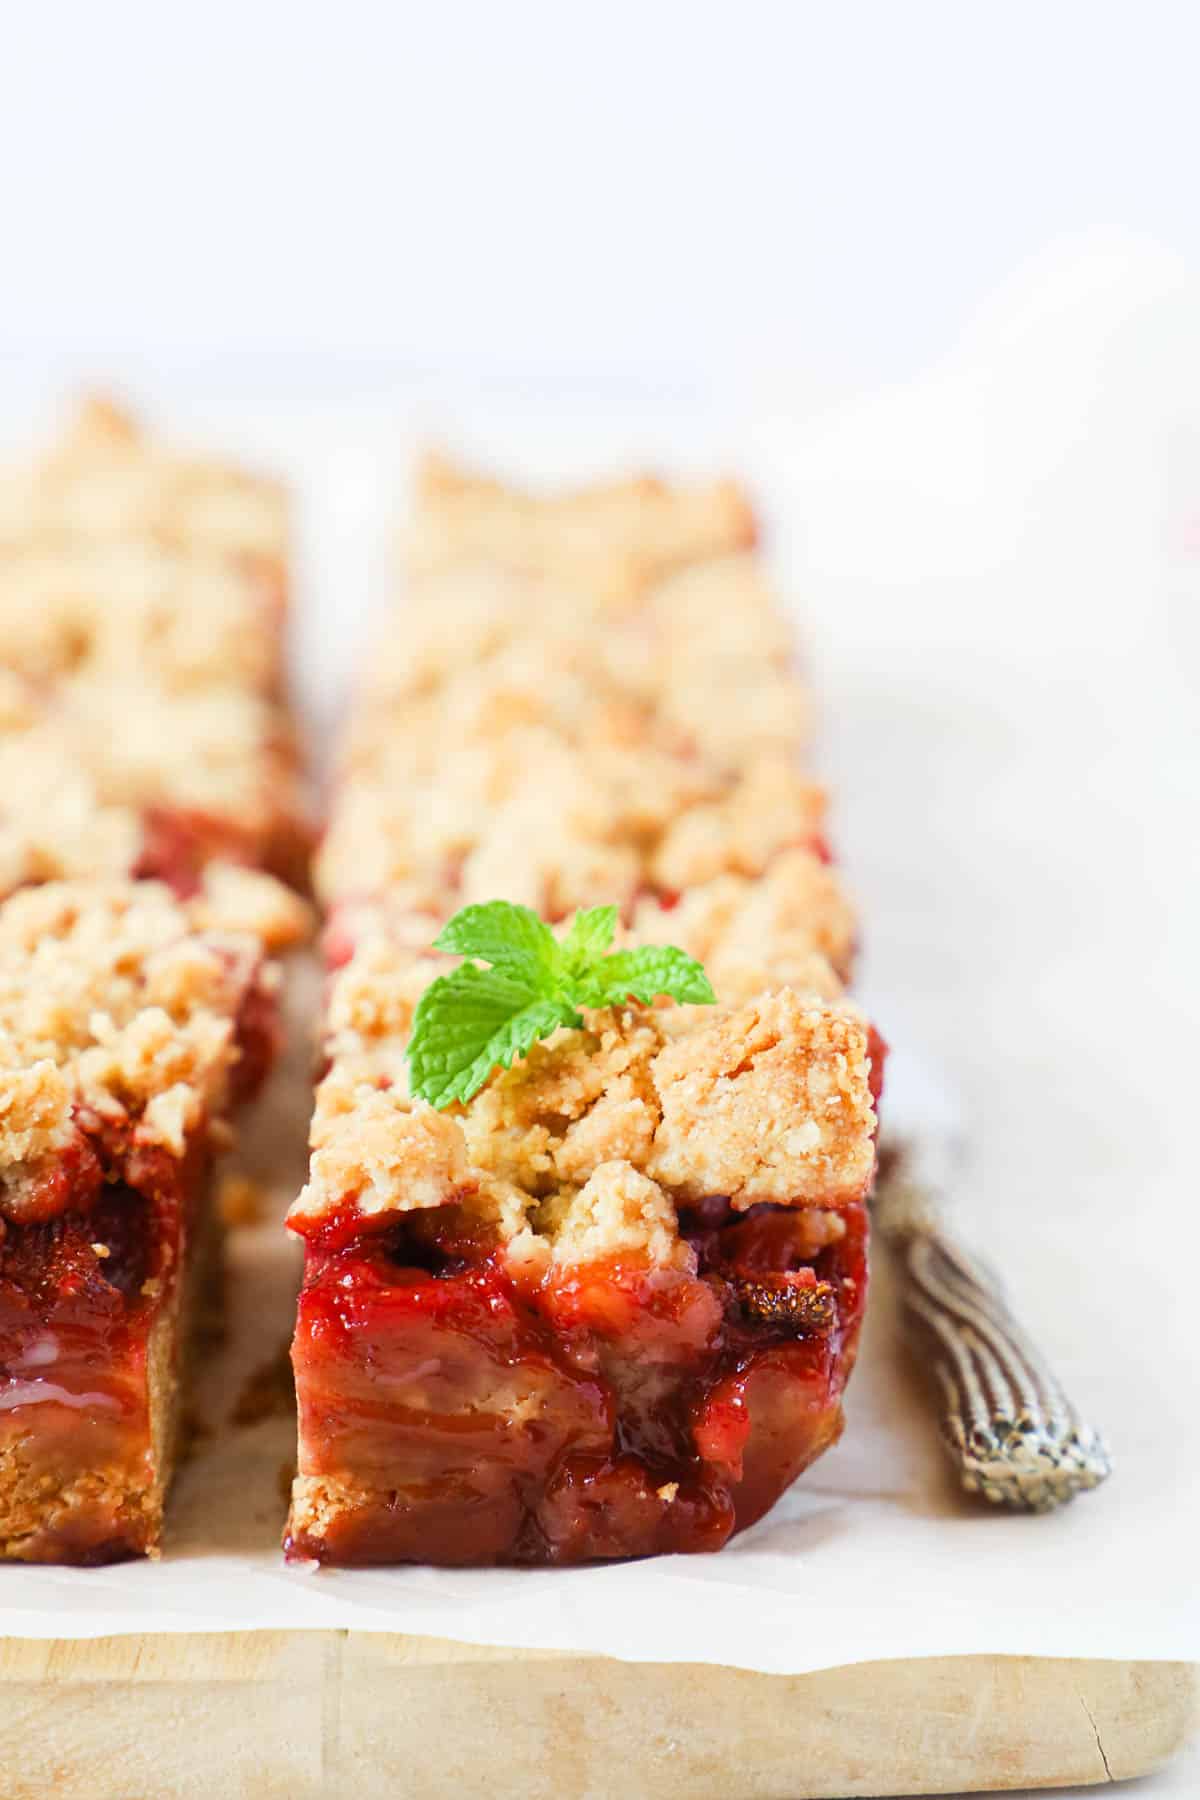 strawberry crumble bar with a small mint leaf of top.